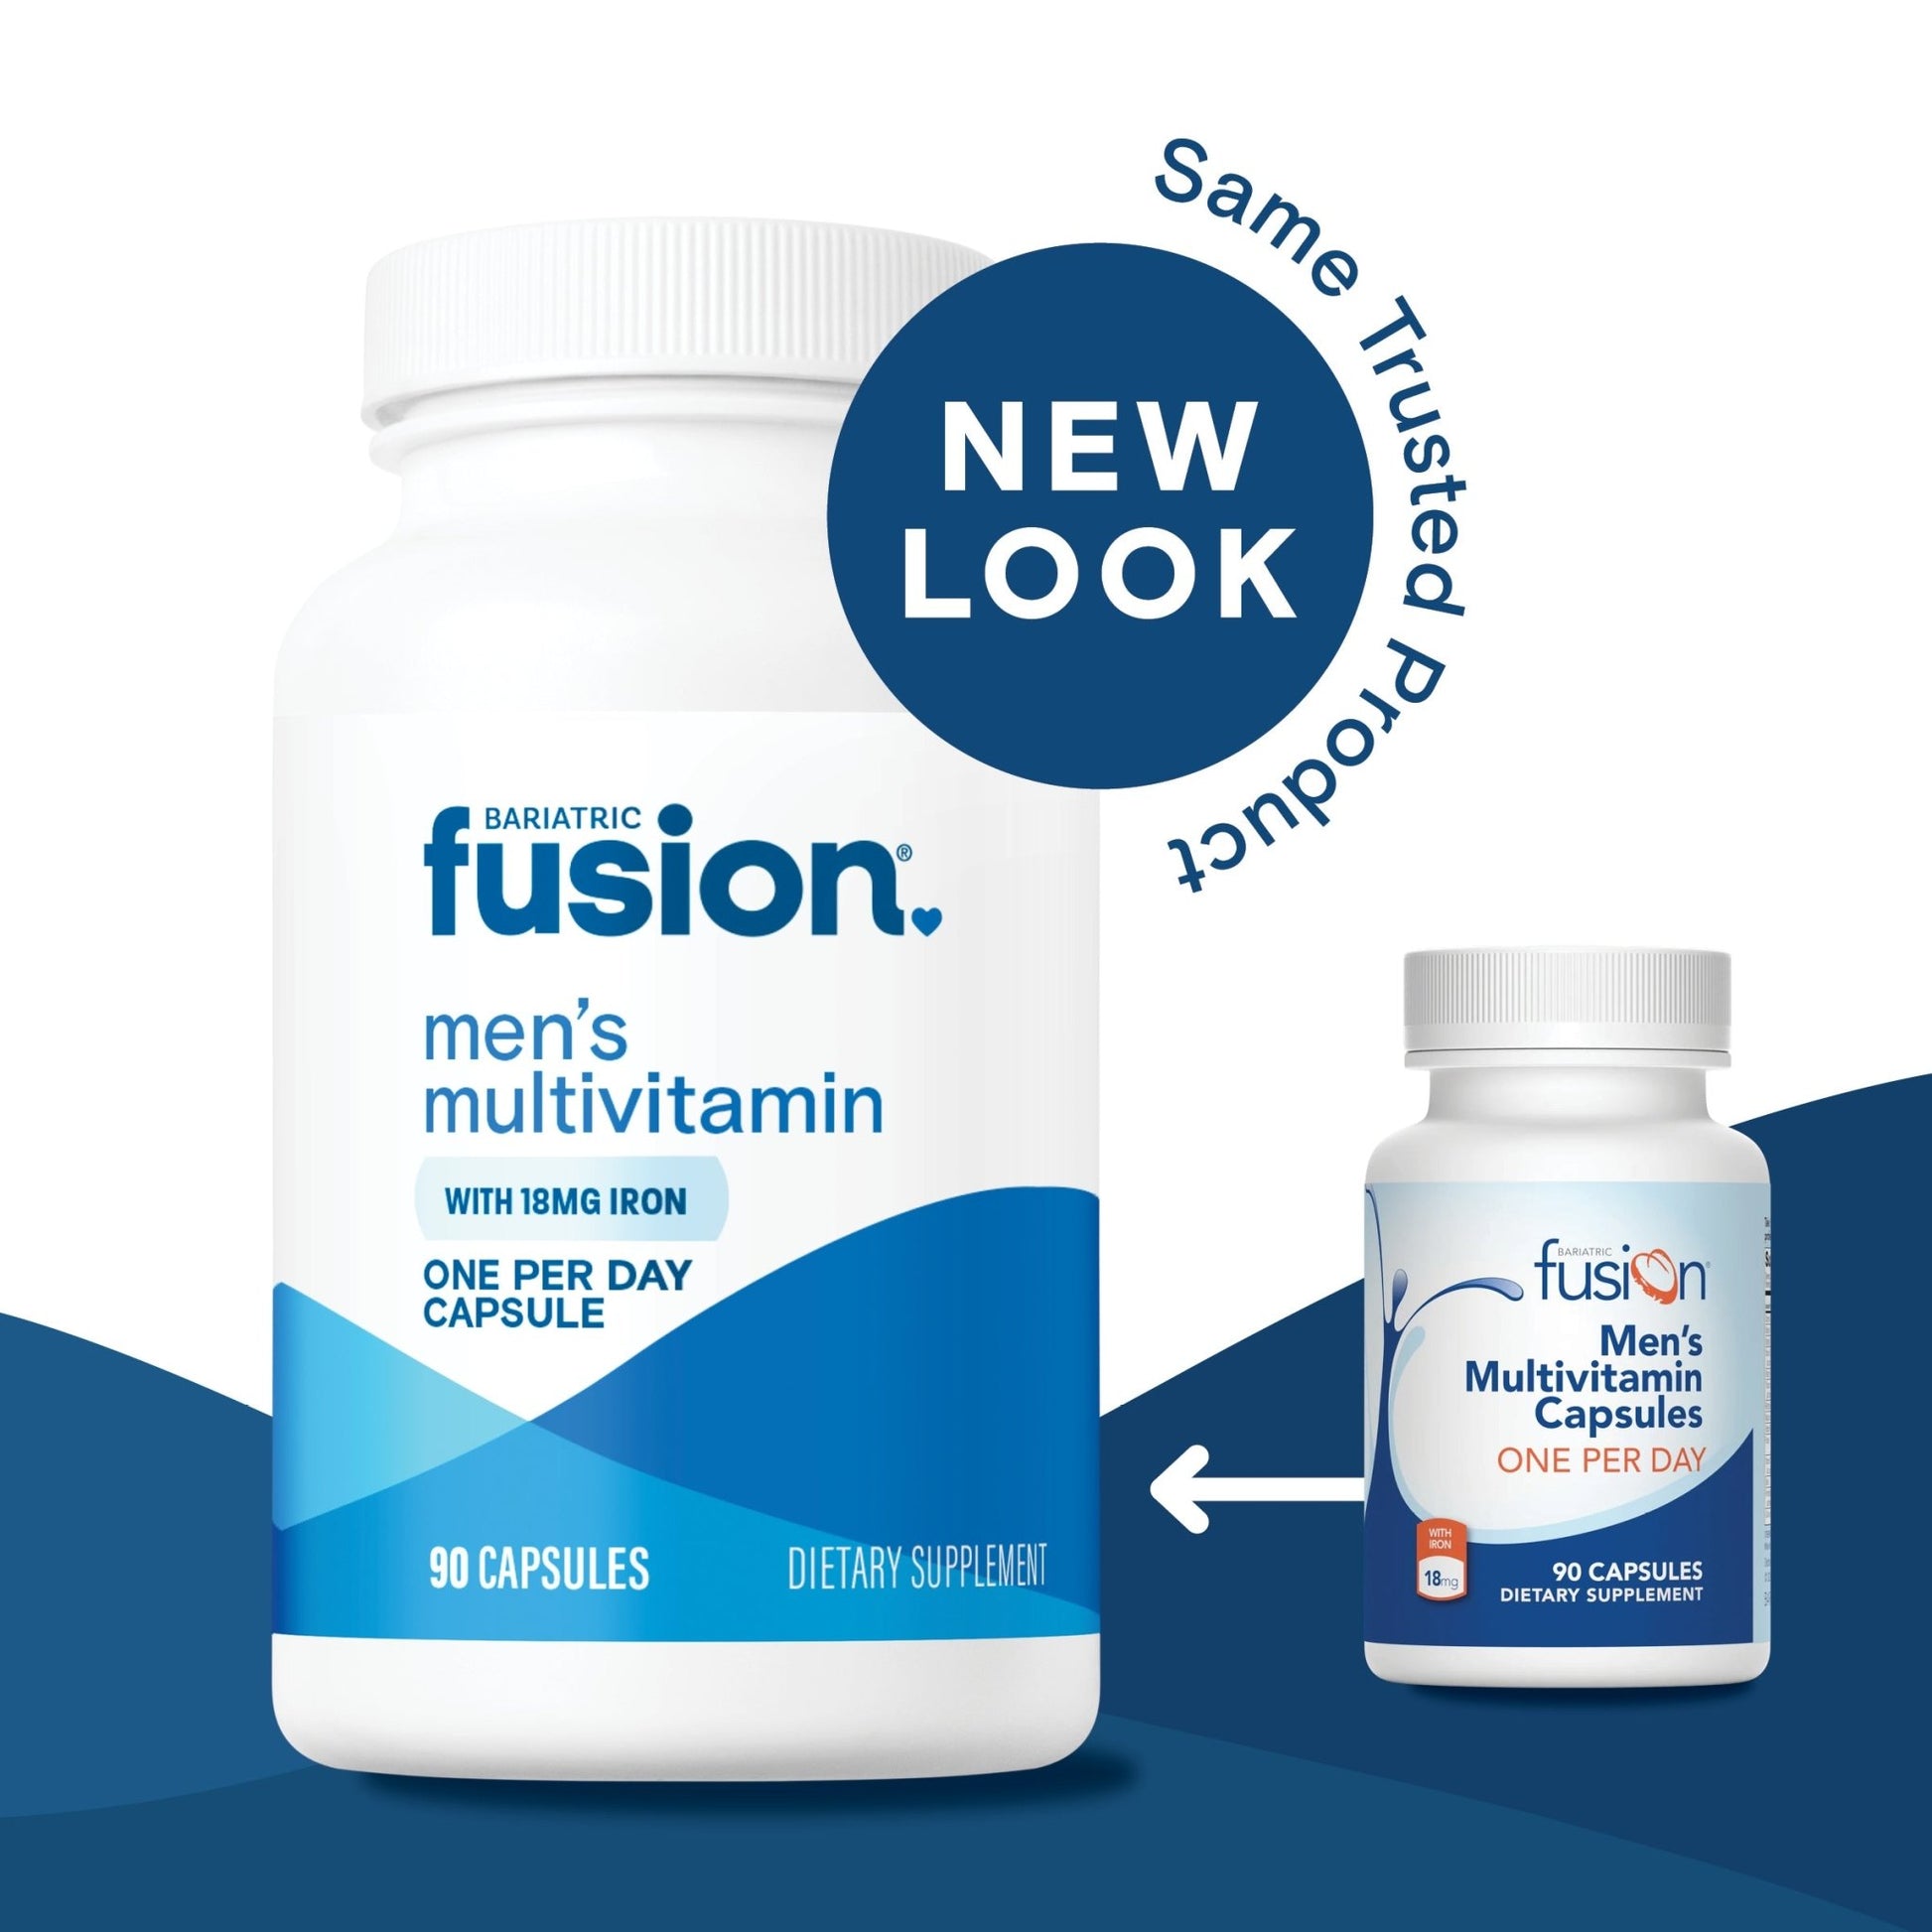 Bariatric Fusion Men’s One Per Day Bariatric Multivitamin 90 capsules new look, same trusted product.